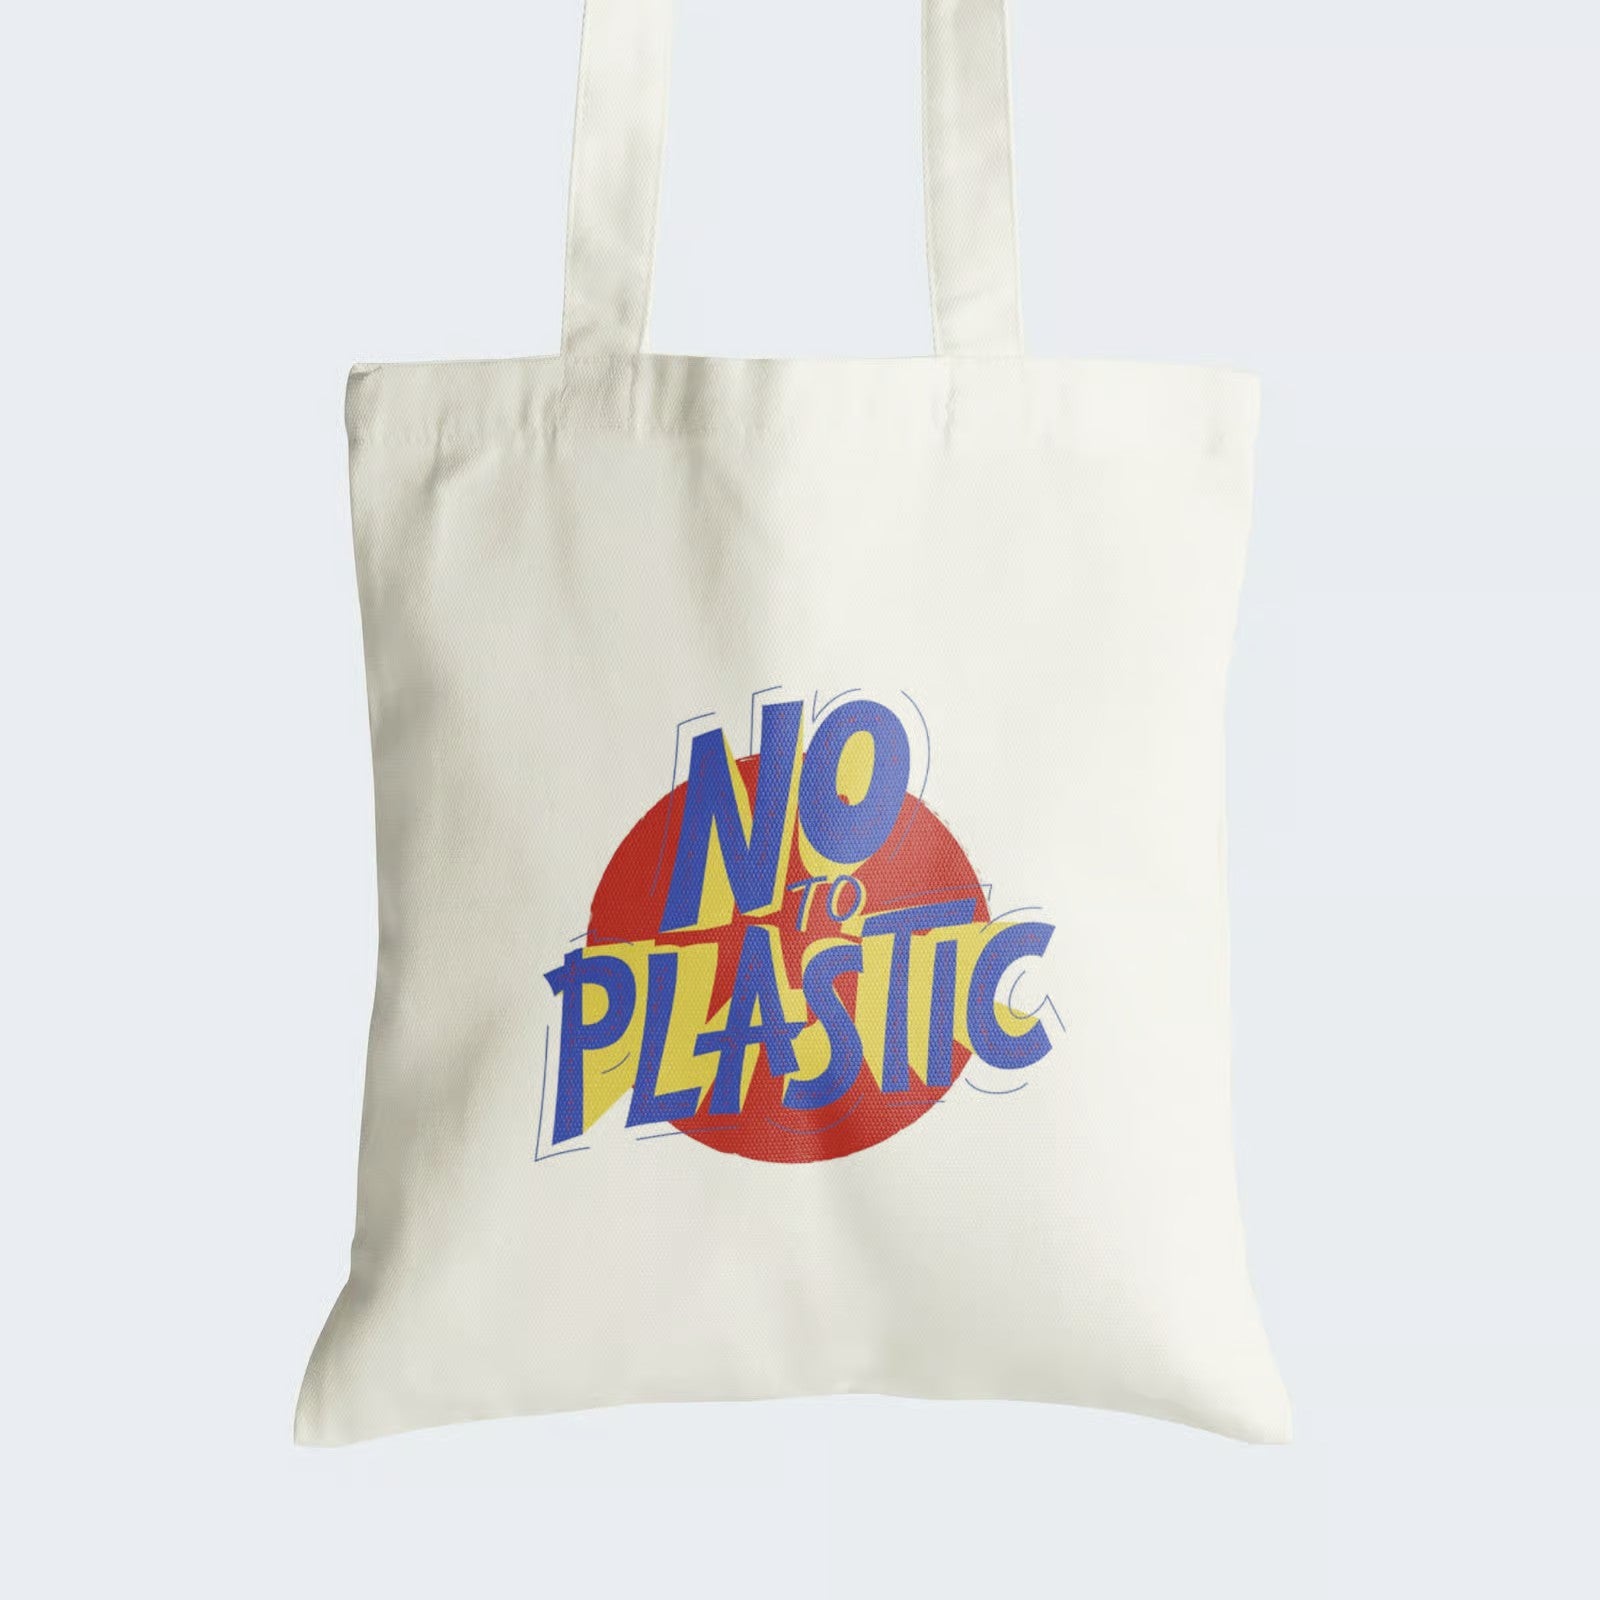  Elevate your style and environmental commitment with our Cotton Canvas Tote Bag. It boldly showcases the message "No to Plastic" in vivid blue against a vibrant red circle, urging eco-conscious choices. Crafted for both durability and style, it features a secure zipper closure for daily convenience. By opting for this reusable tote, you not only make a statement but also actively support reducing plastic waste. Get yours today and say "No to Plastic" in style!